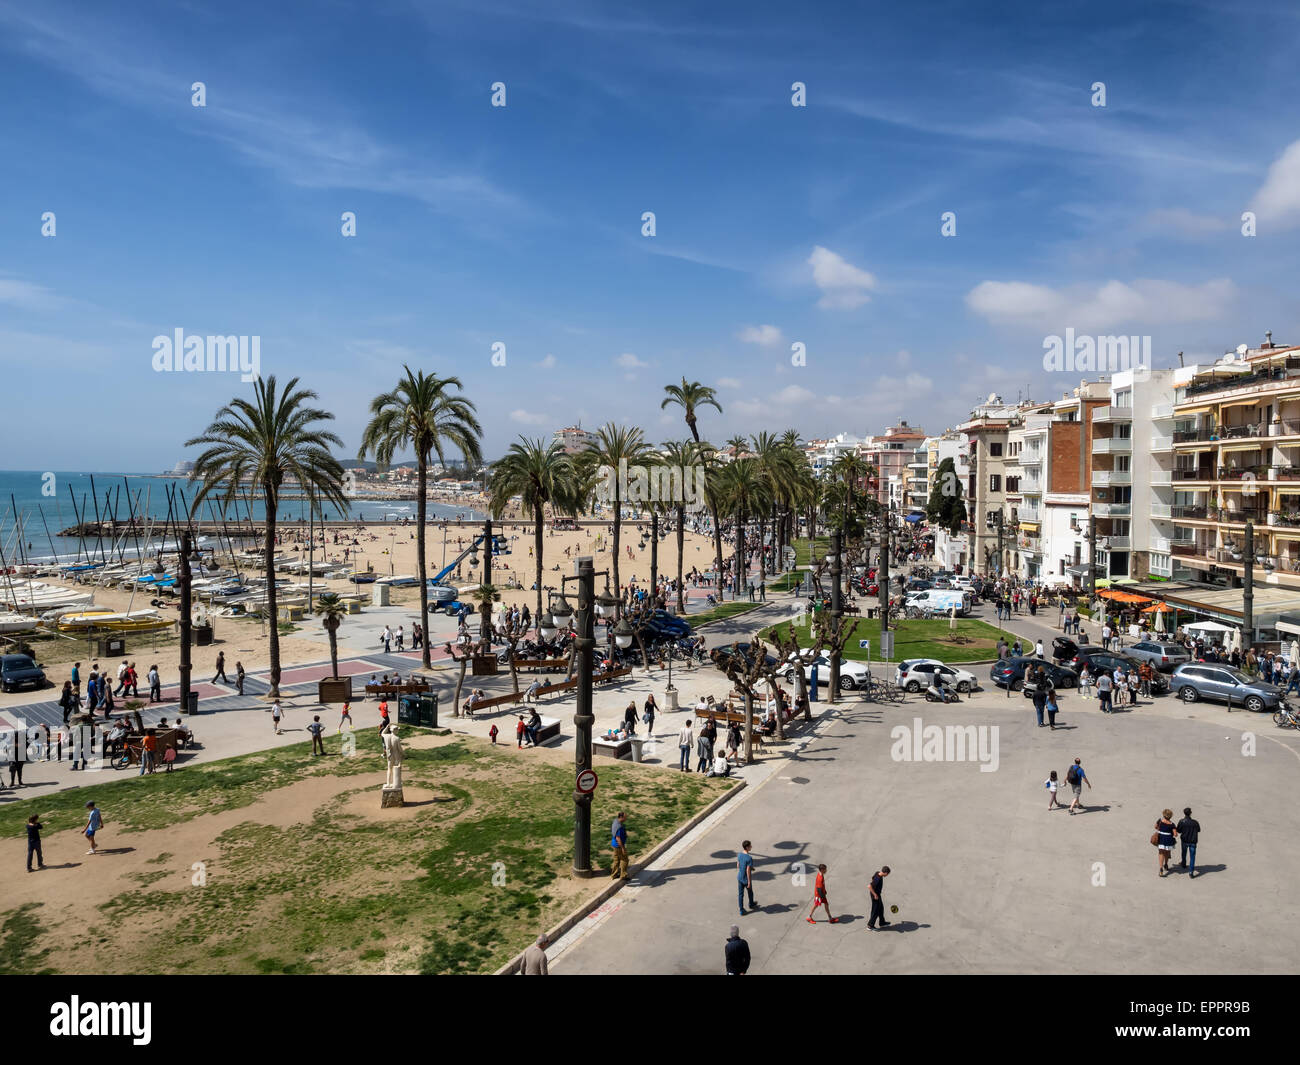 Aerial view of the beach and promenade area of the popular touristic town Sitges in Costa Dorada Stock Photo